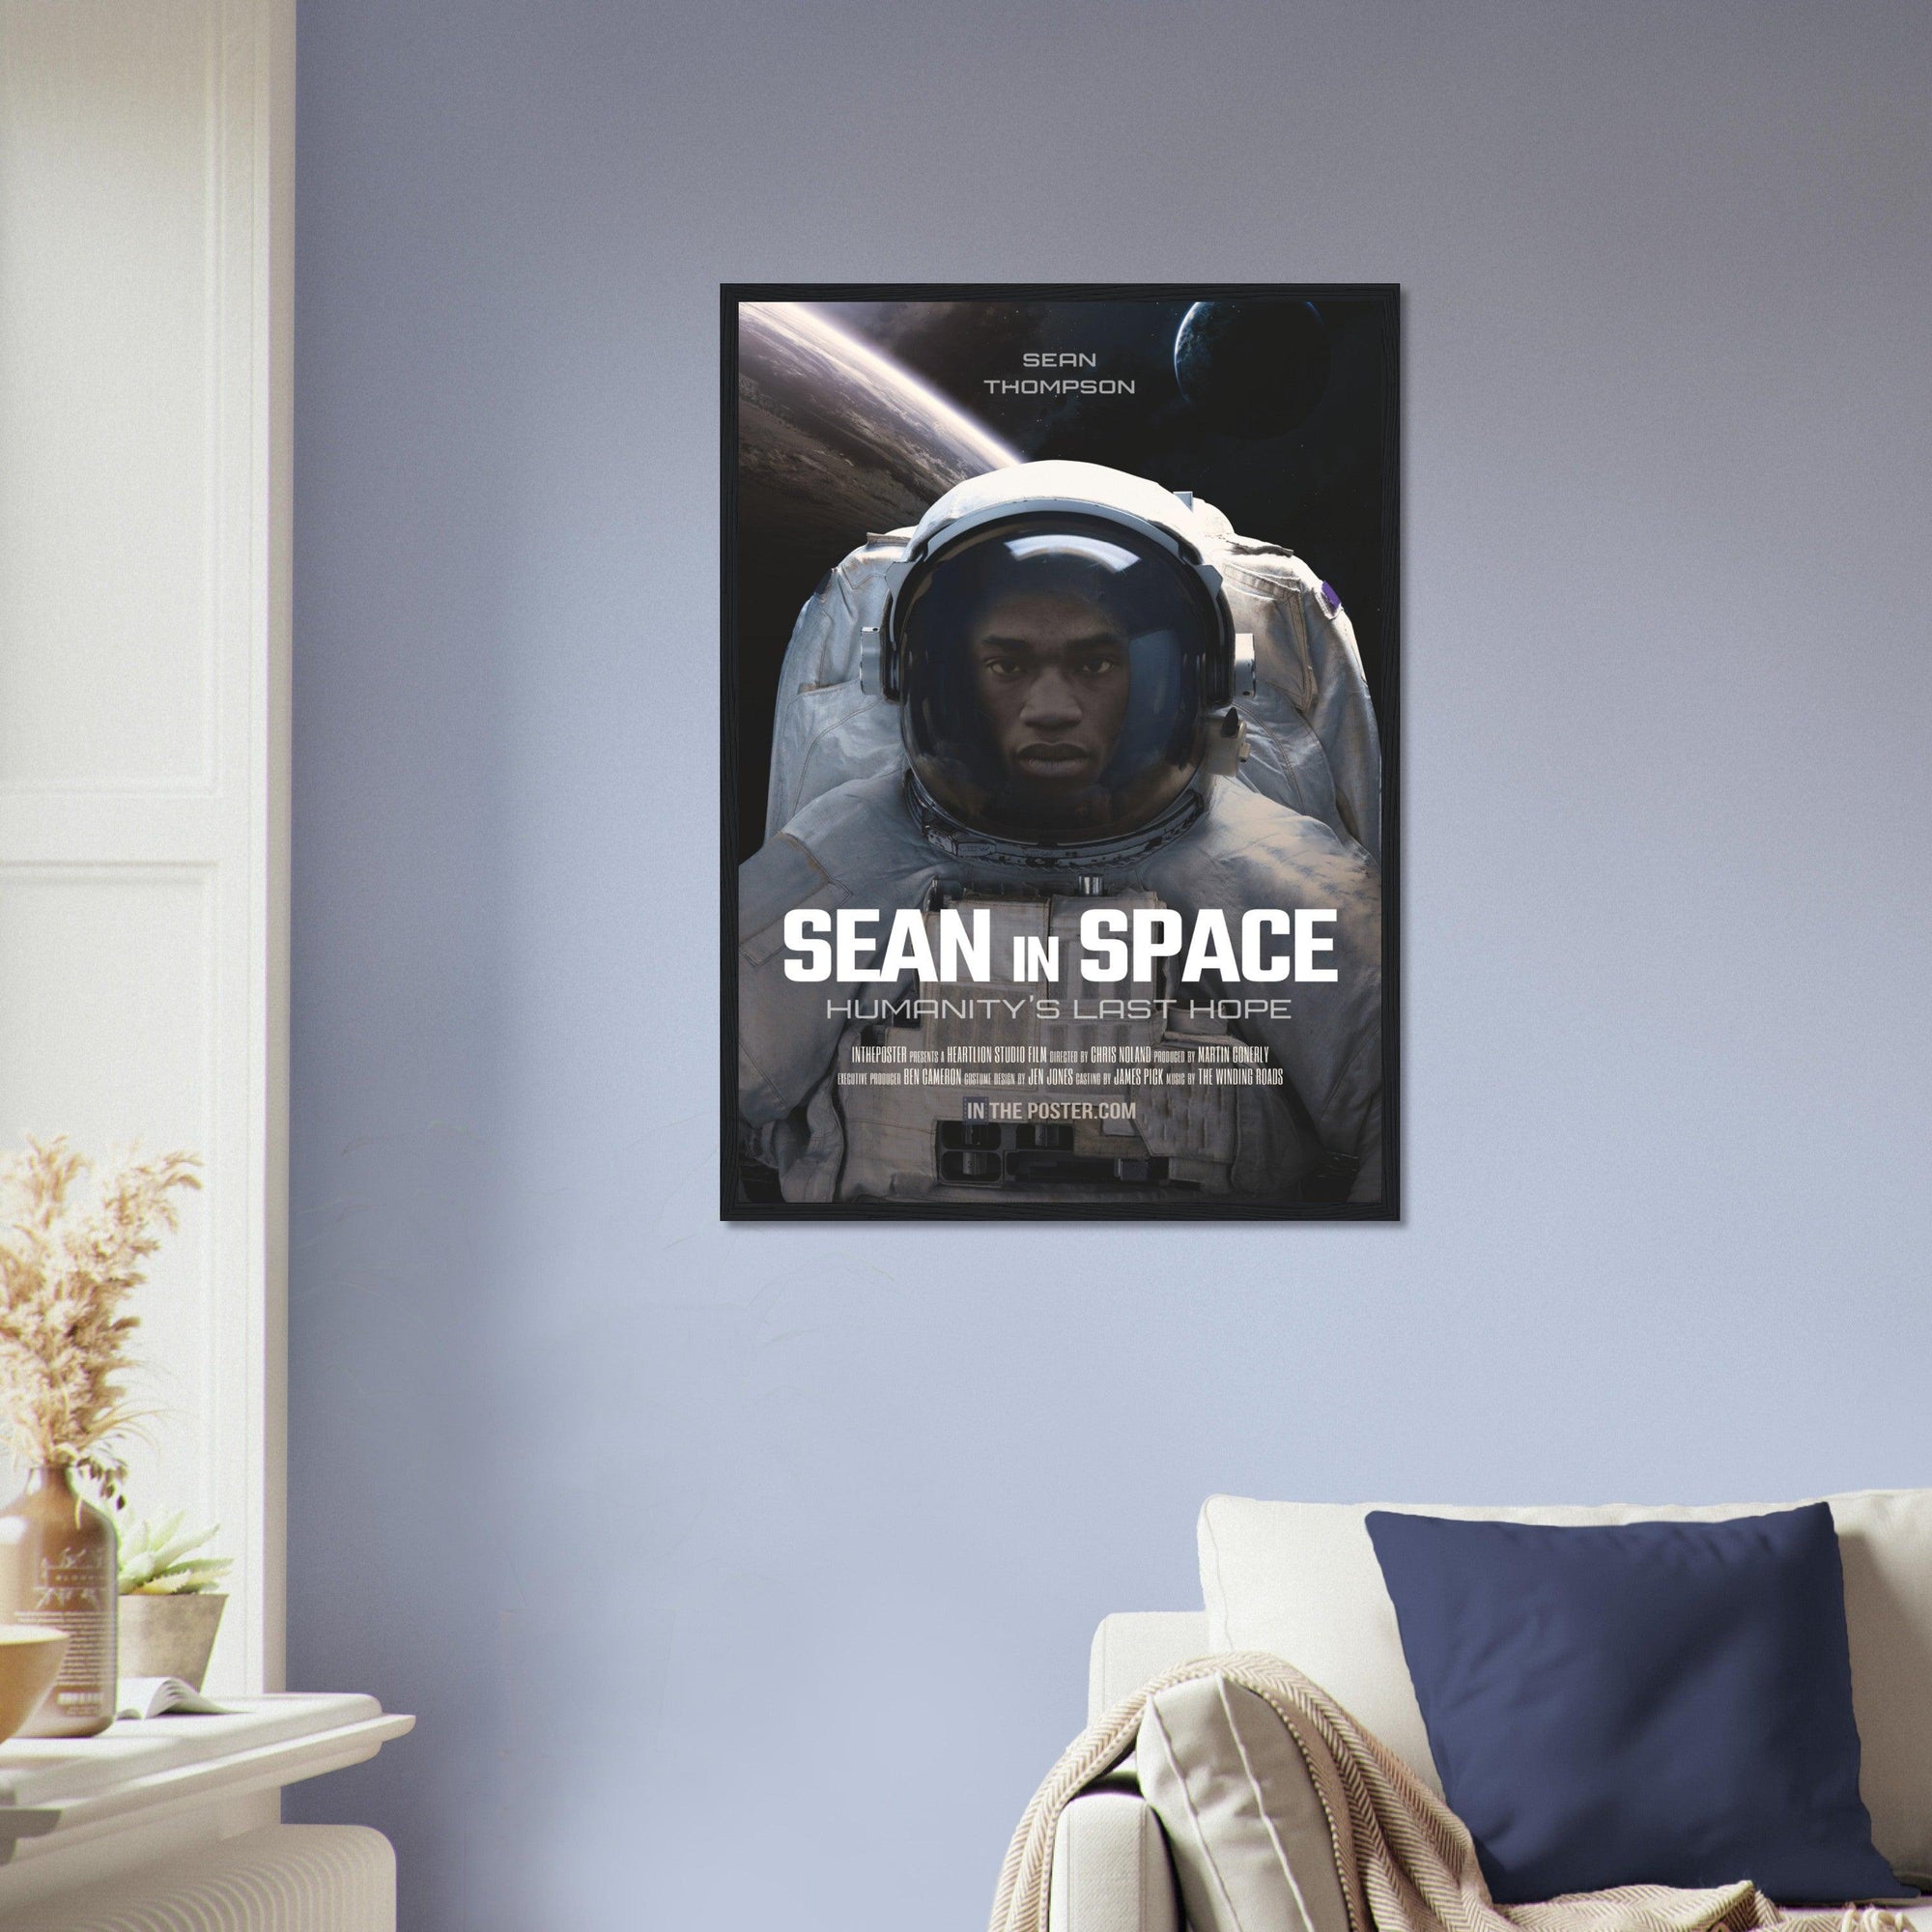 An astronaut sci-fi movie poster design in a regular black frame on a blue wall above a designer sofa